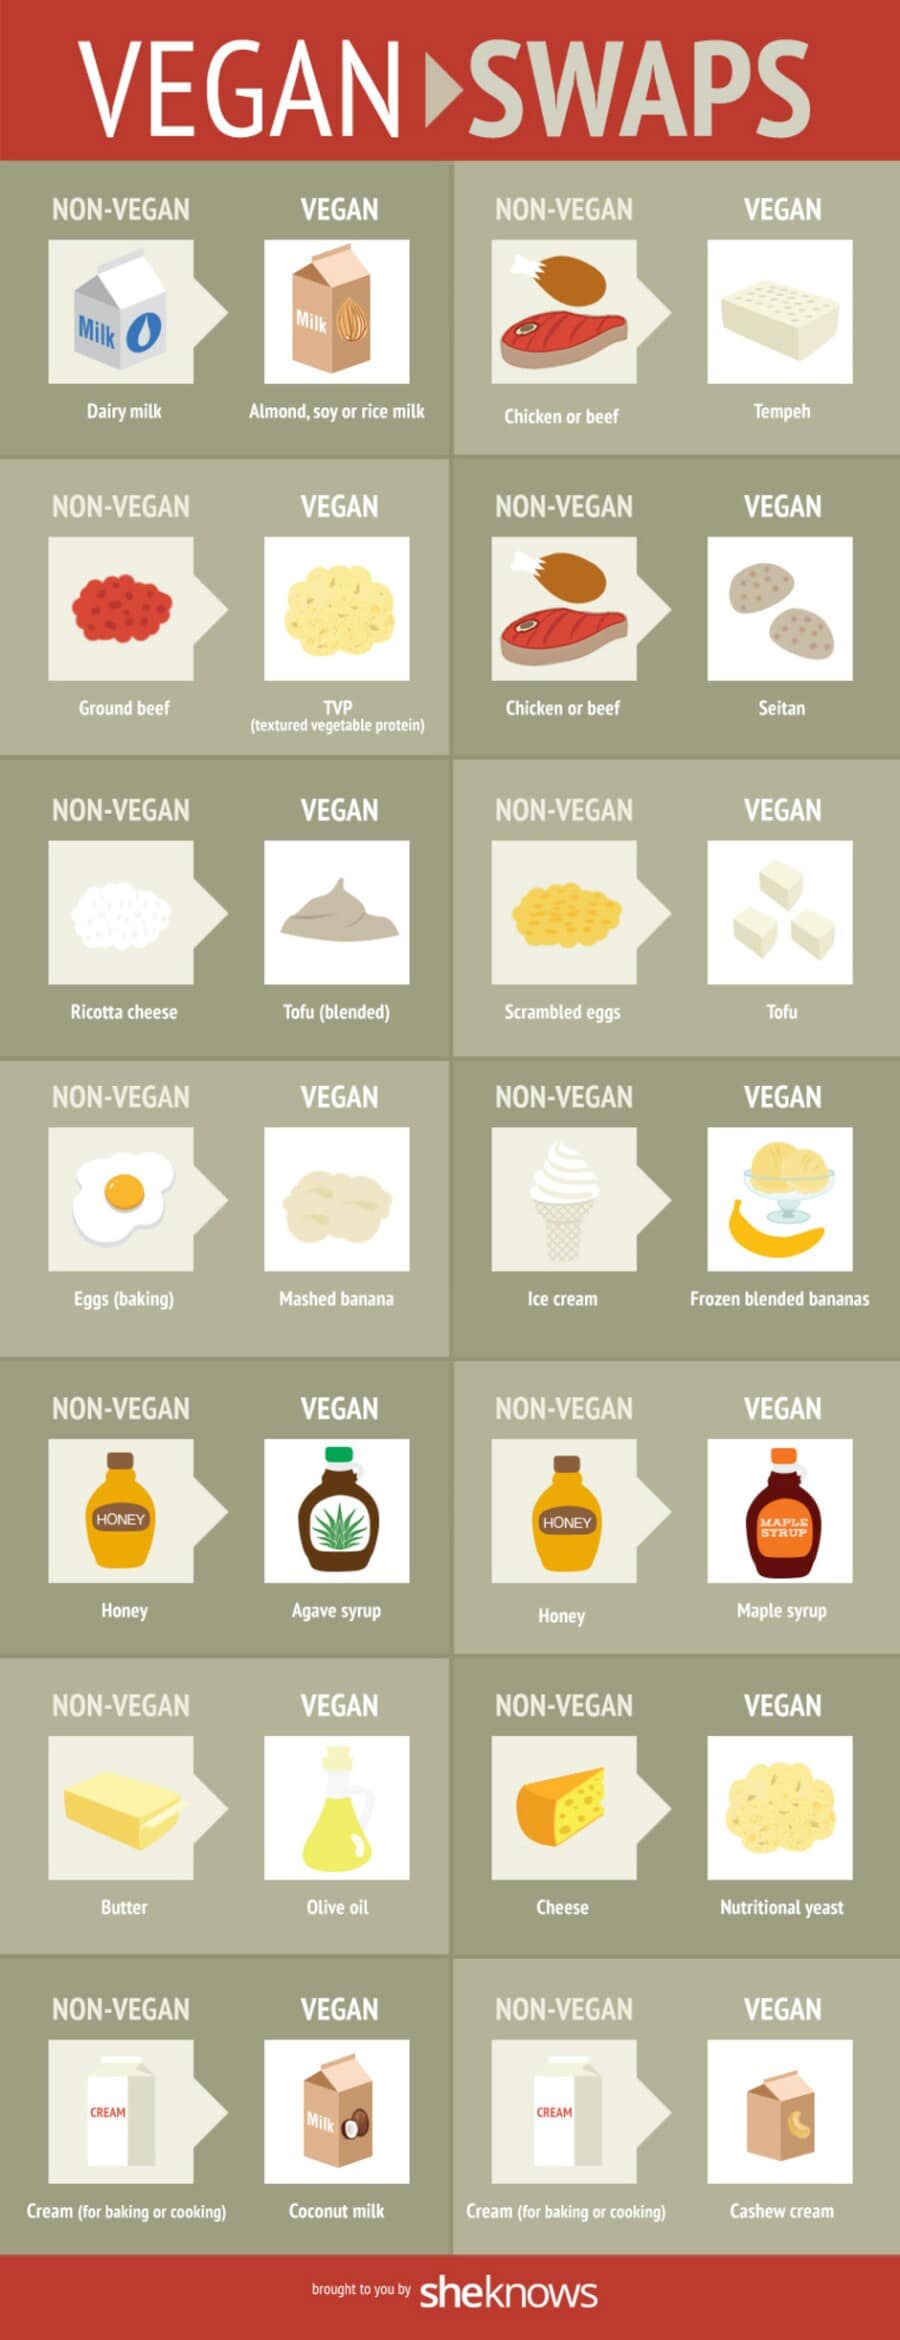 Discover simple vegan food substitutions.